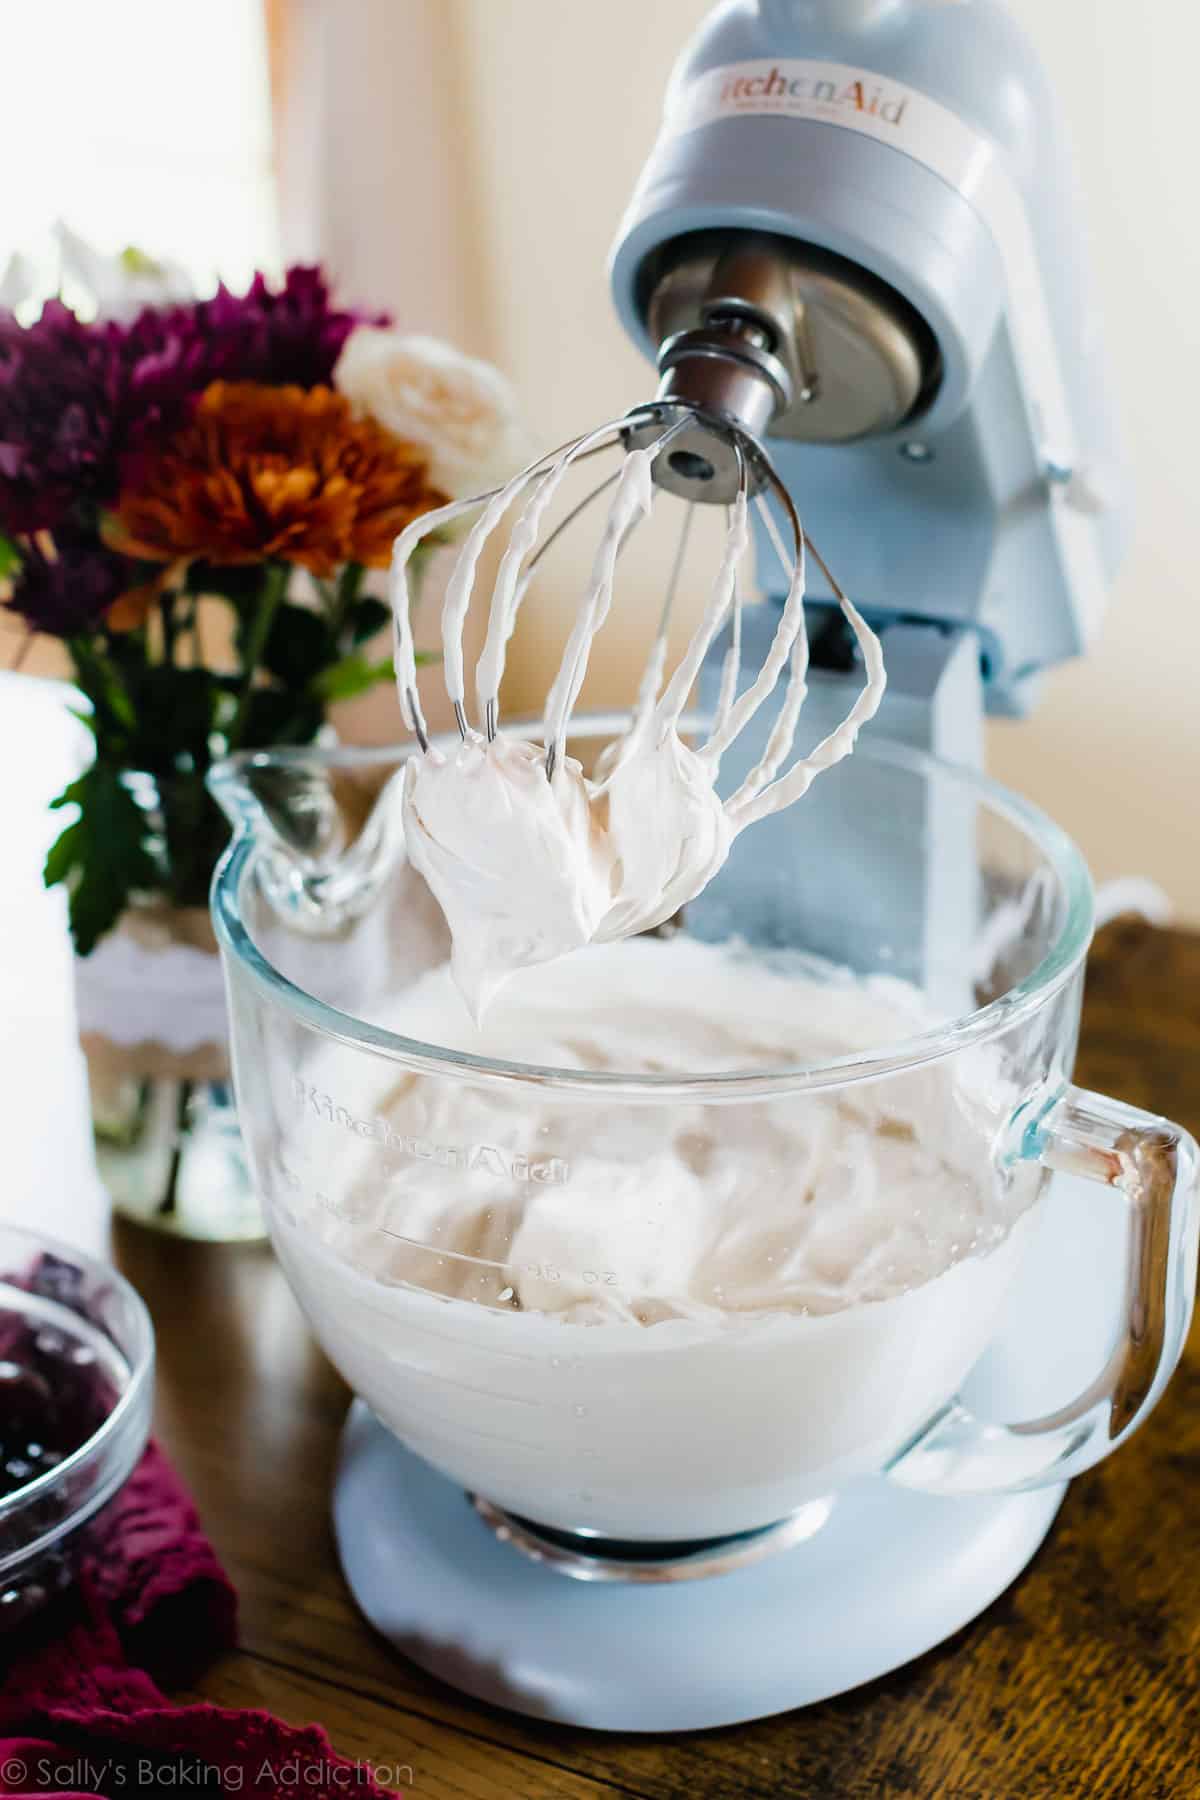 Homemade Whipped Cream in a glass stand mixer bowl